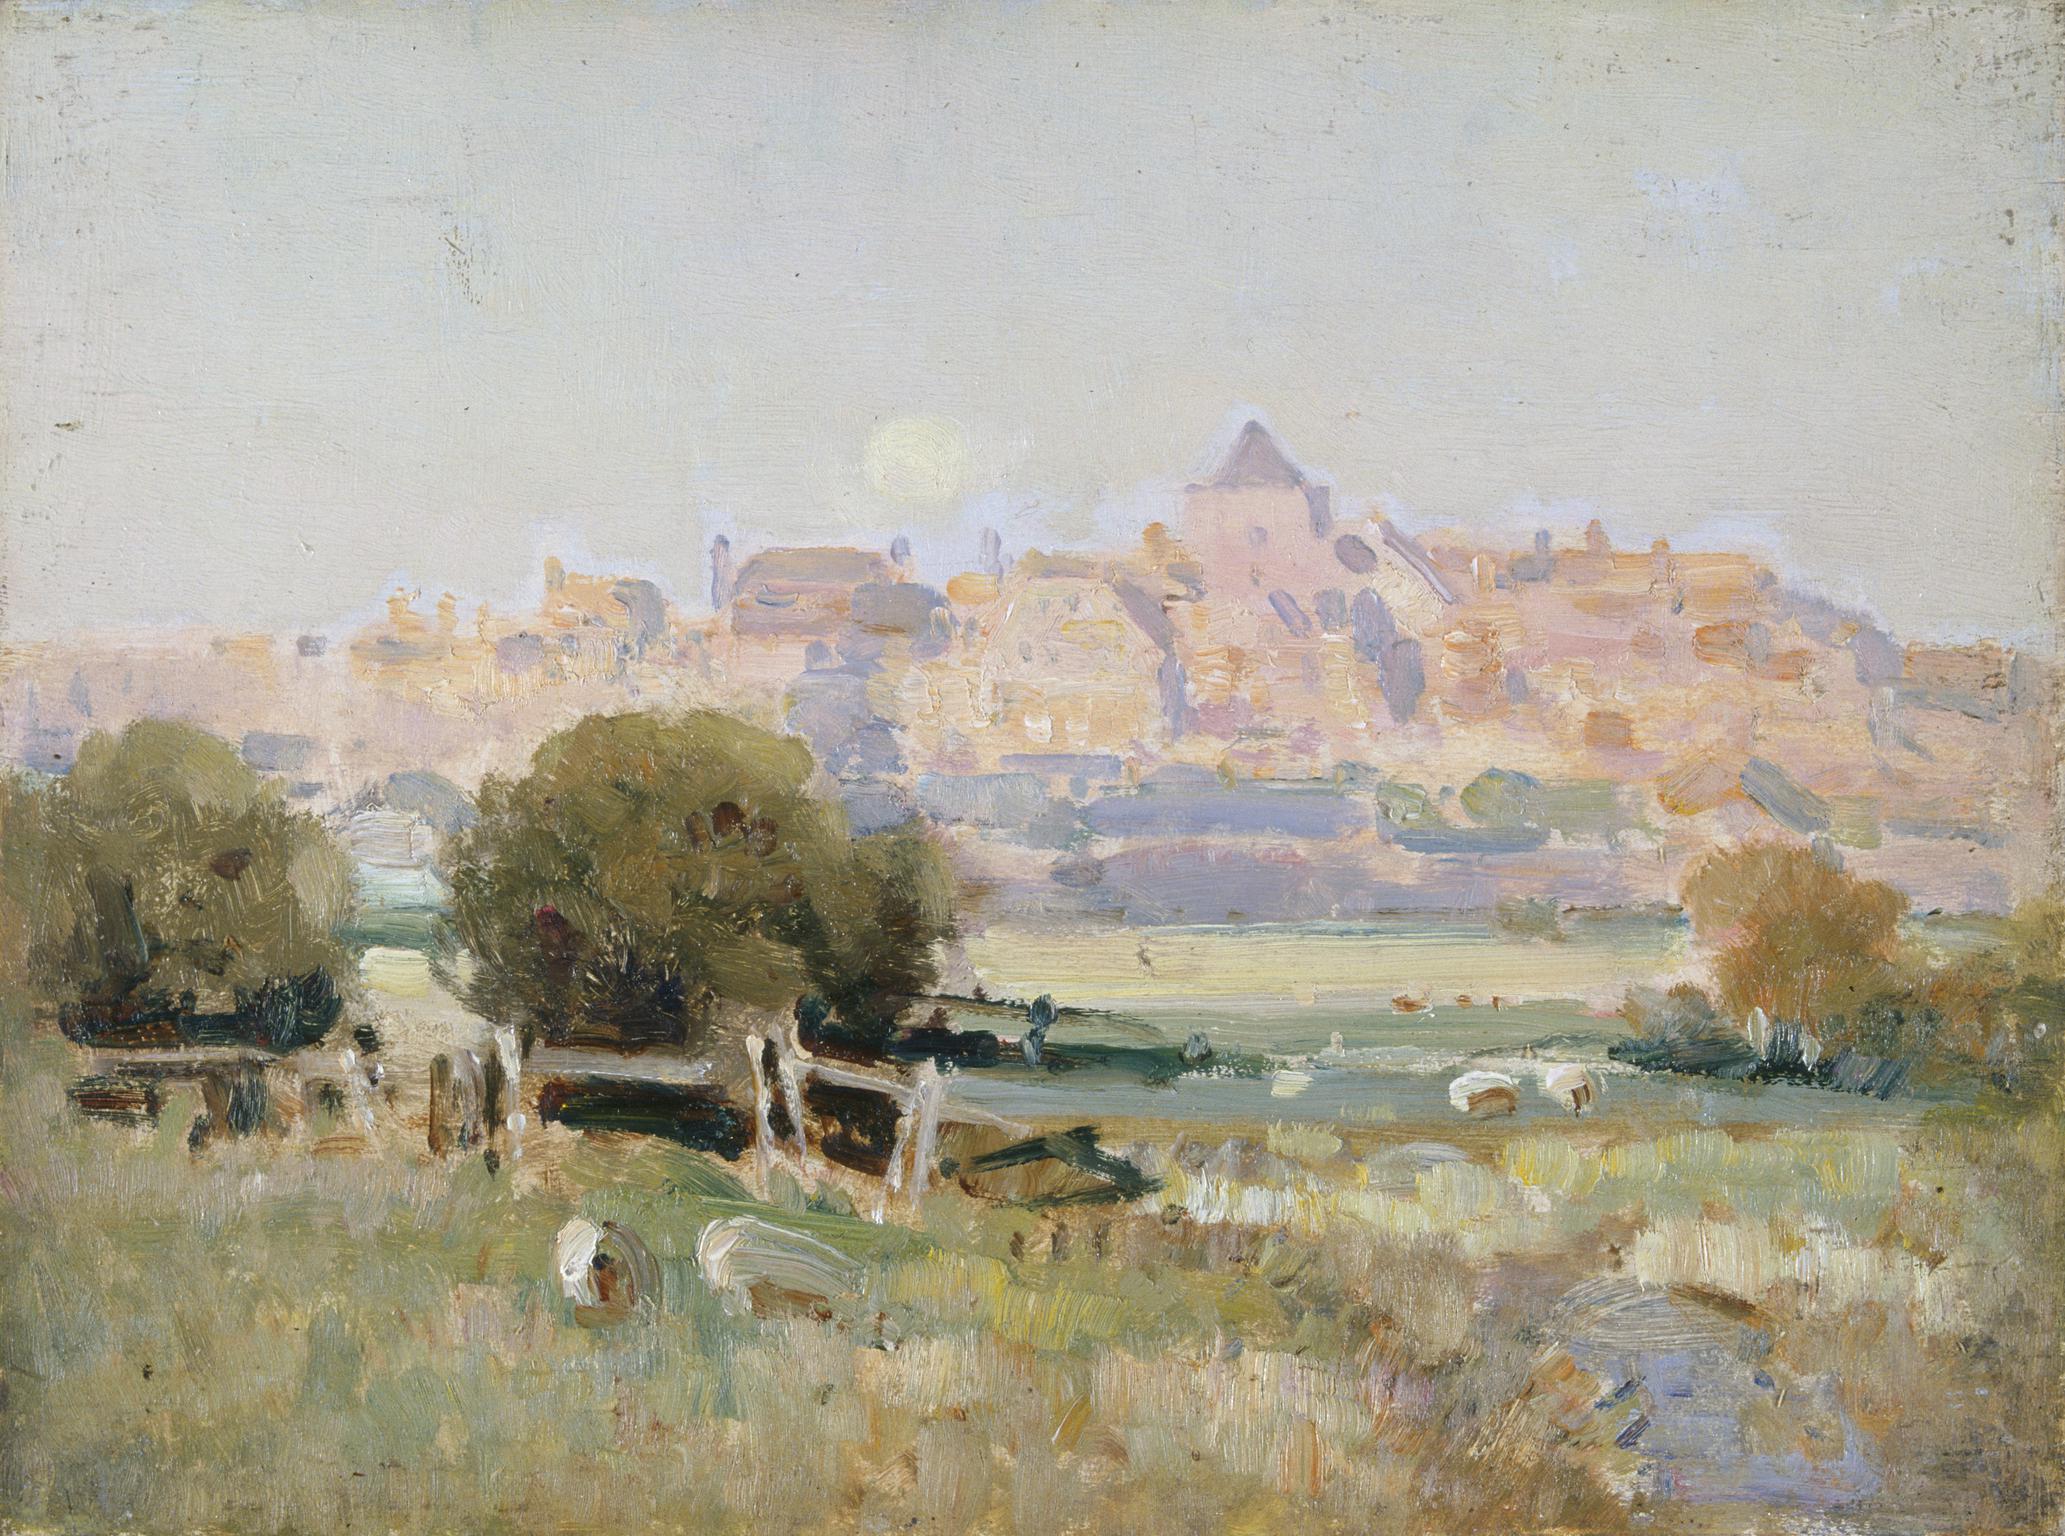 Landscape with village, painting